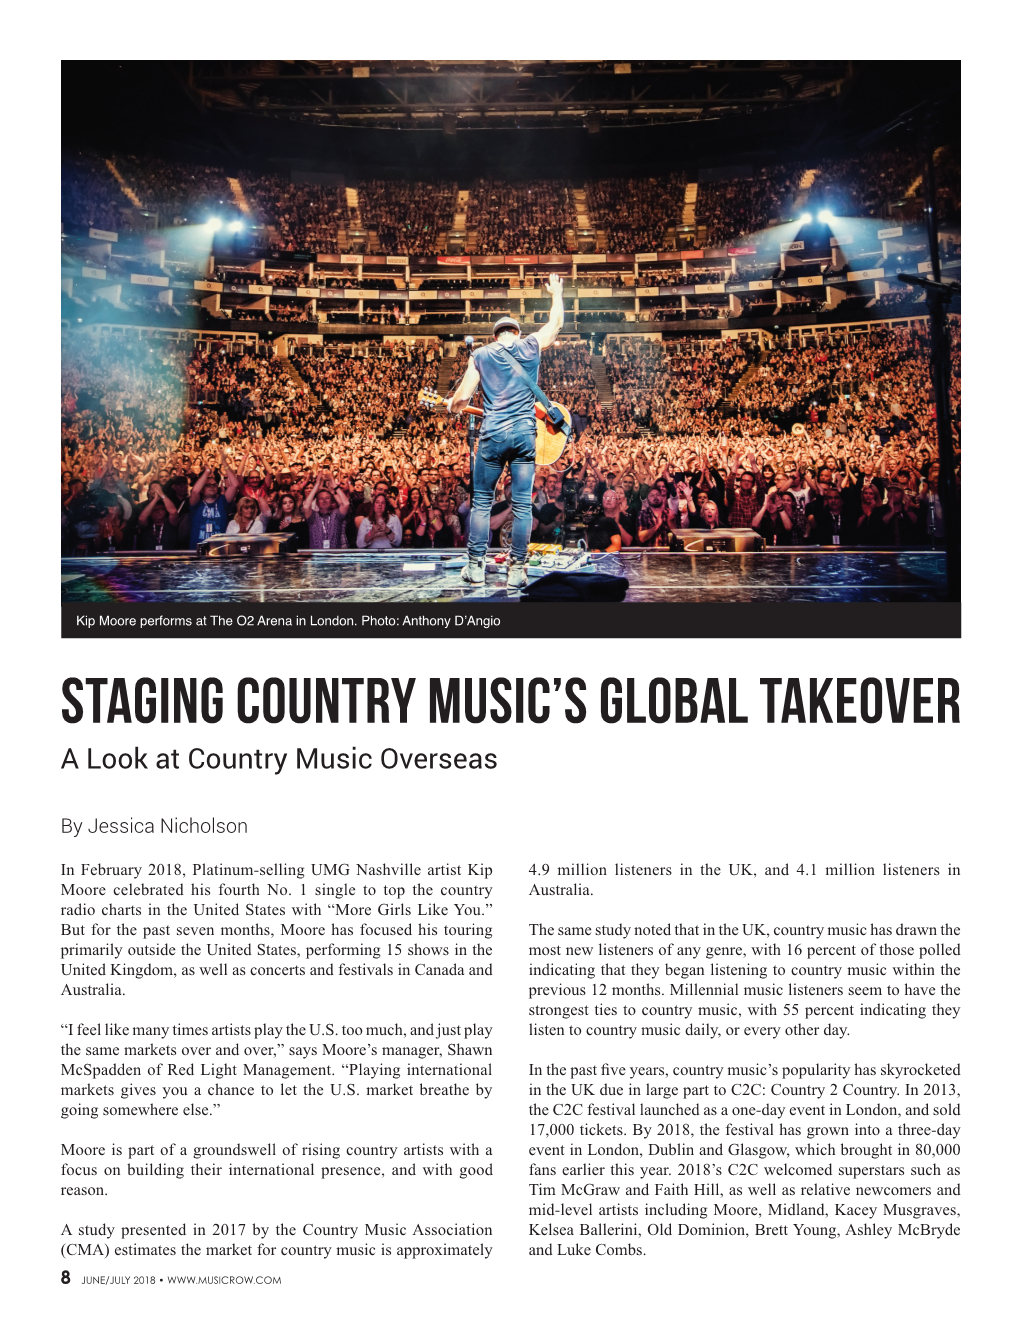 Staging Country Music's Global Takeover